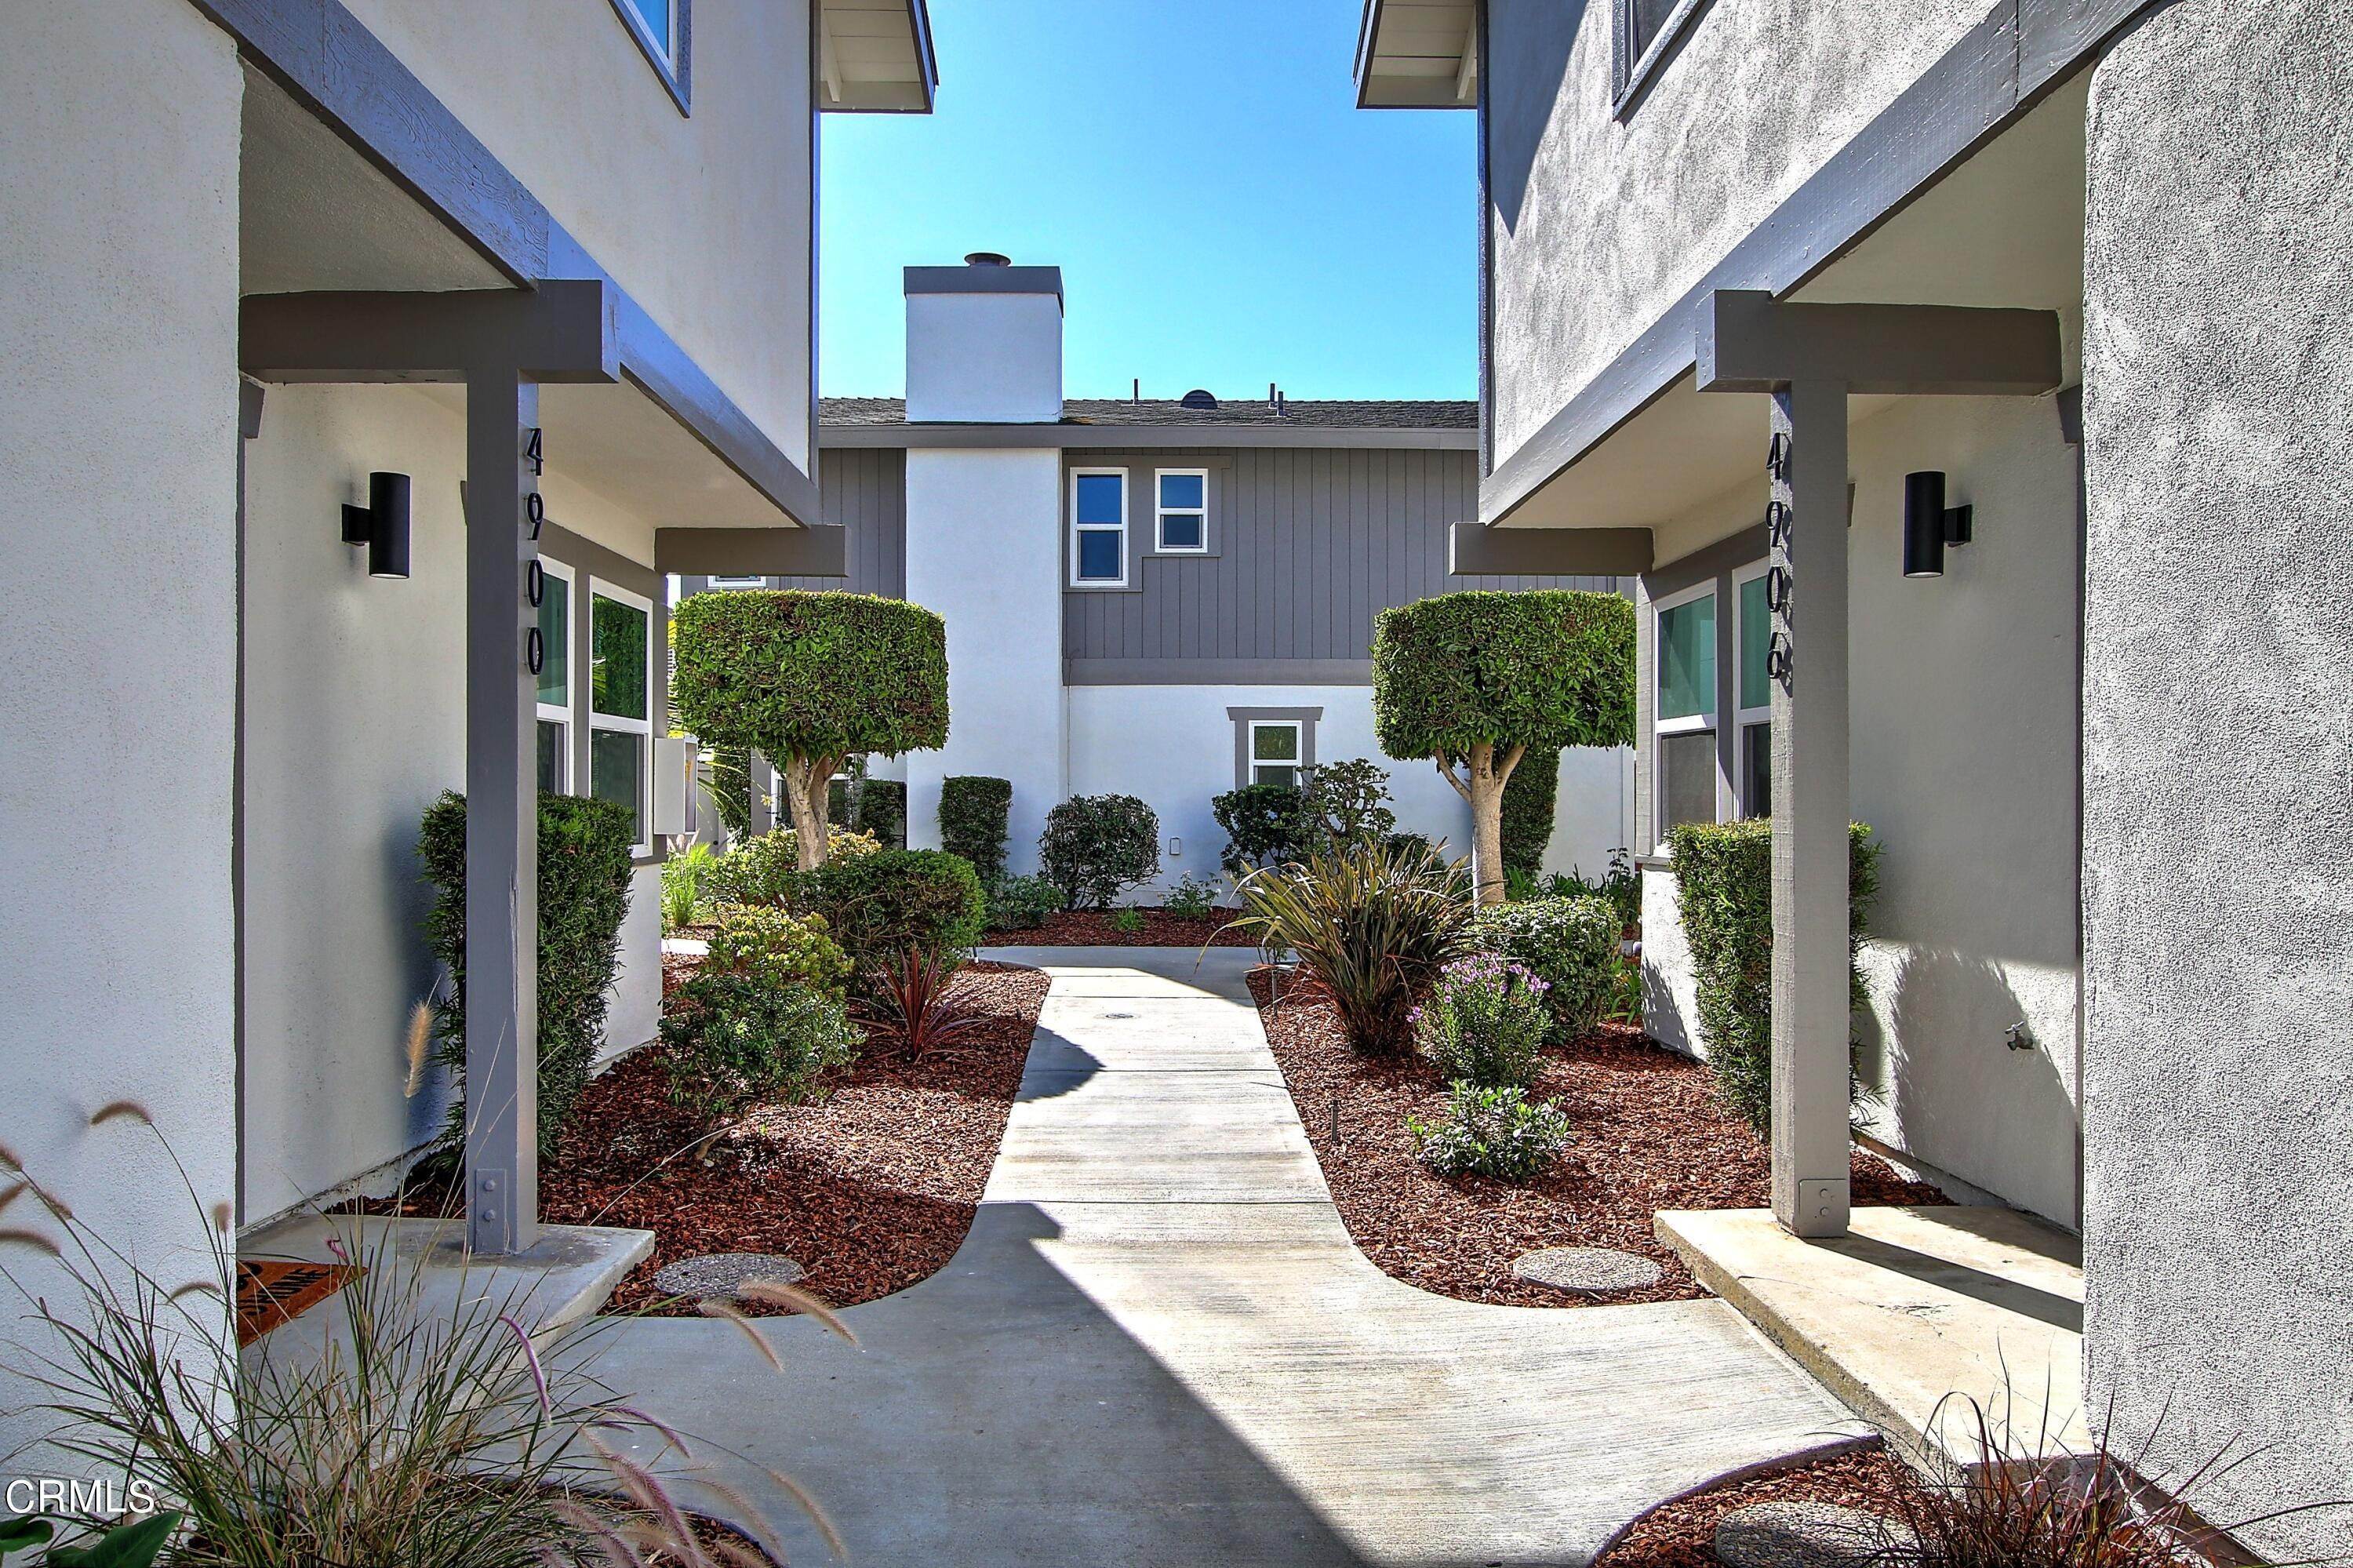 1. townhouses for Sale at 4906 Dunes Street Oxnard, California 93035 United States